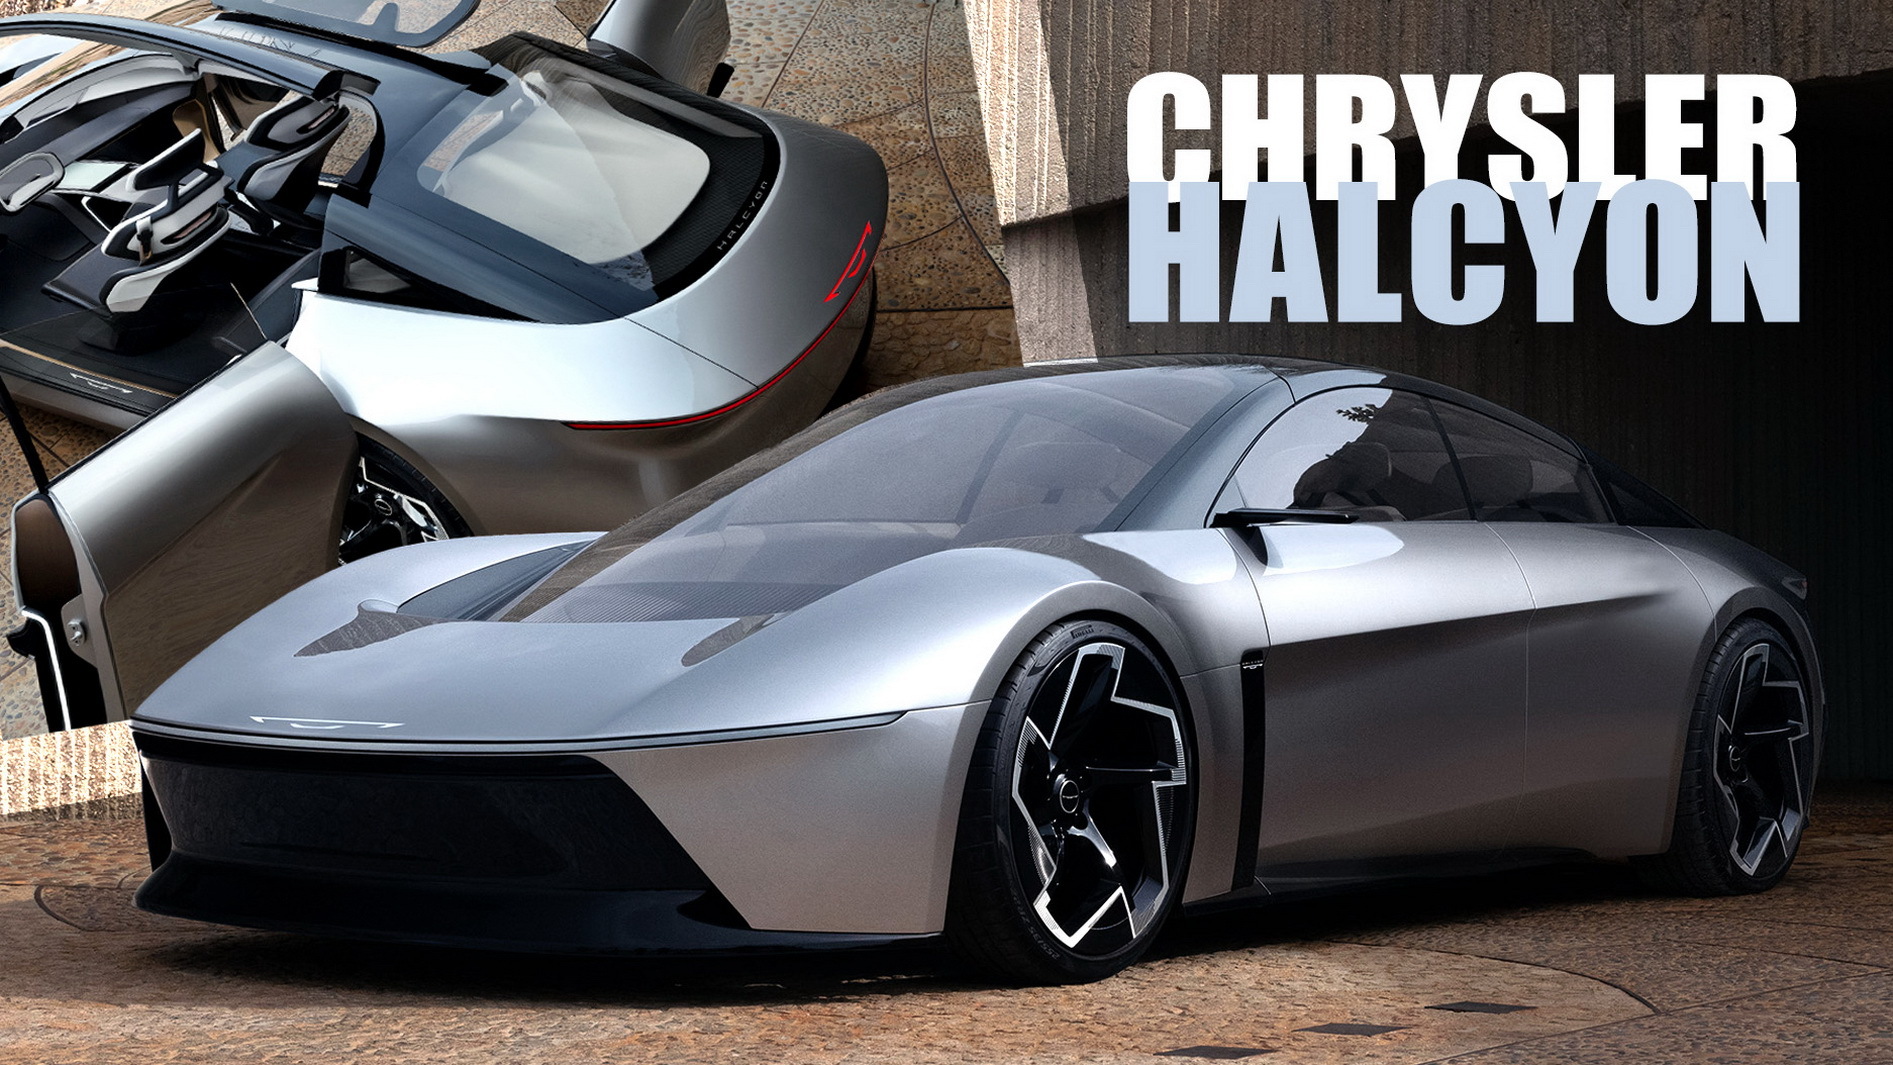 This Amazing Halcyon Concept Is Why Chrysler Ditched Airflow – TRACEDNEWS